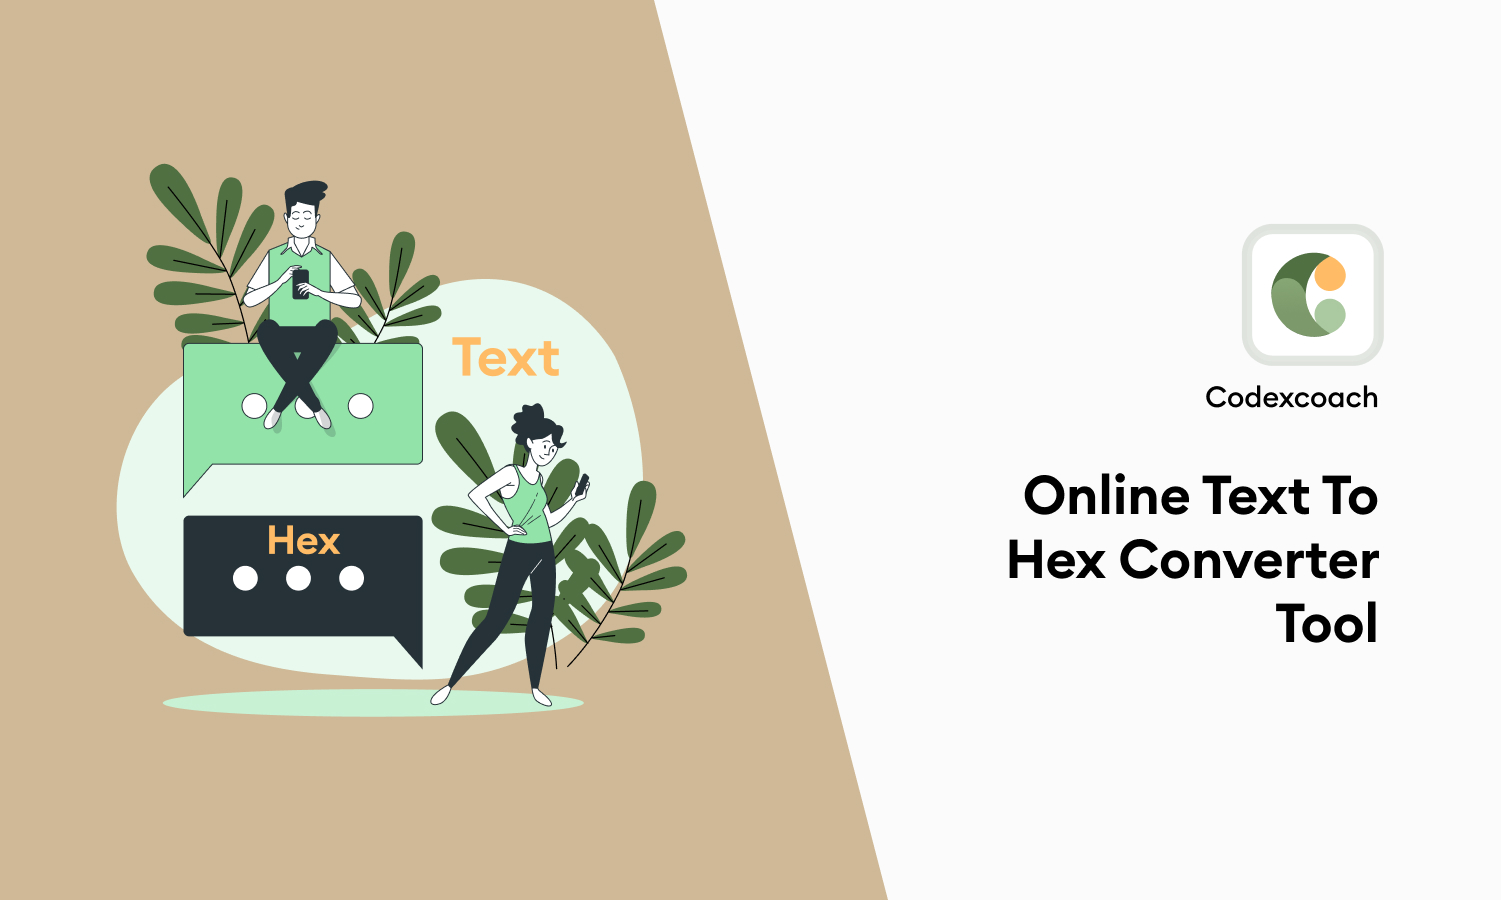 Online Text To Hex Converter Tool